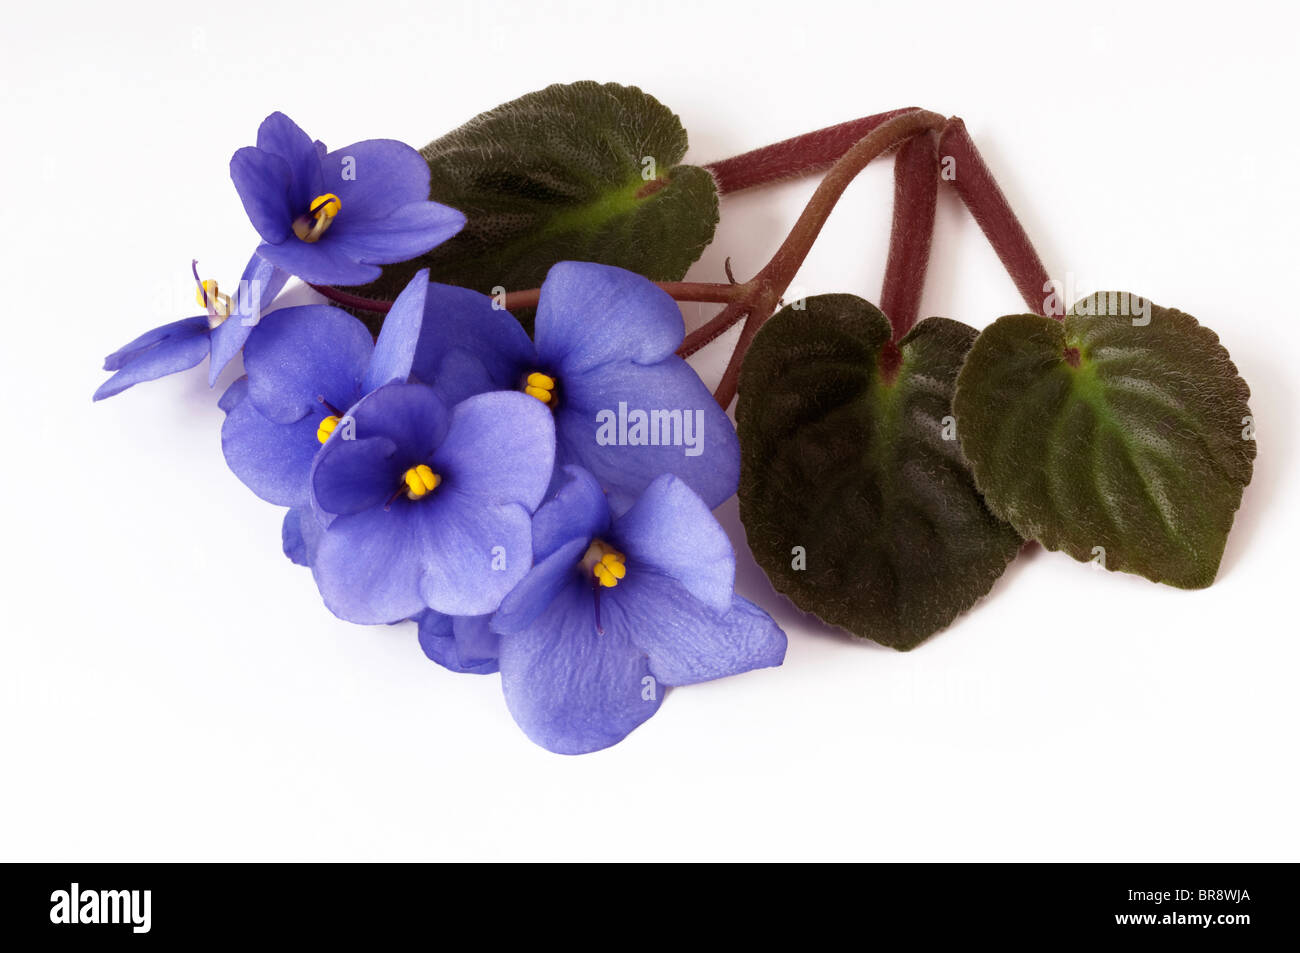 Saintpaulia, African Violet (Saintpaulia ionantha-Hybrid), blue flowers and leaves, studio picture against a white background. Stock Photo